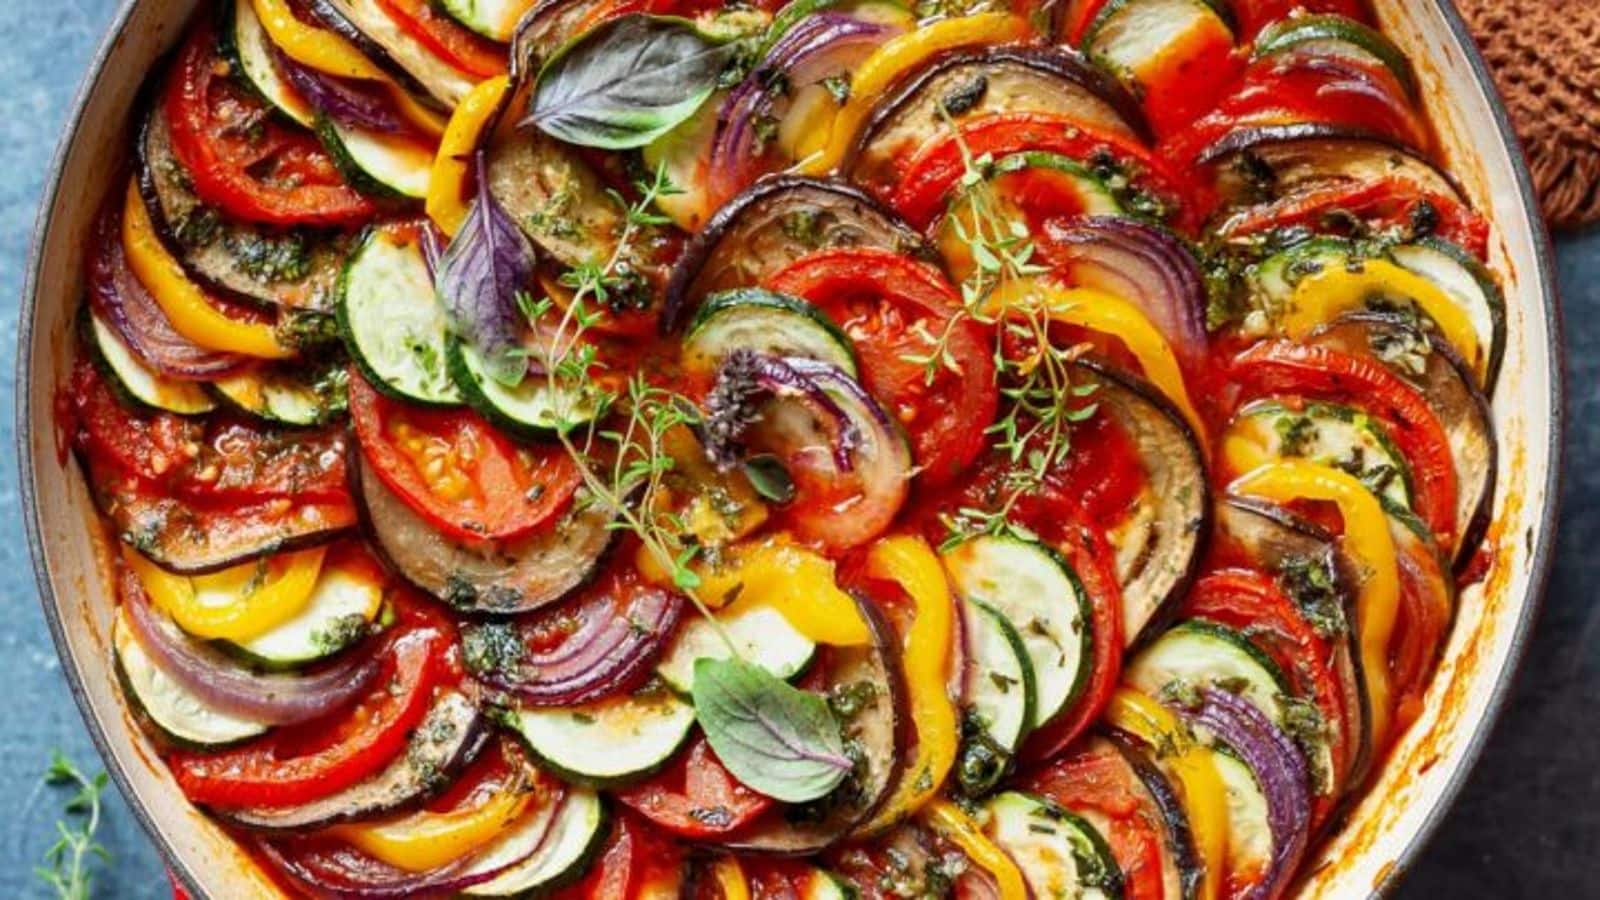 This eggless French ratatouille recipe will impress your guests